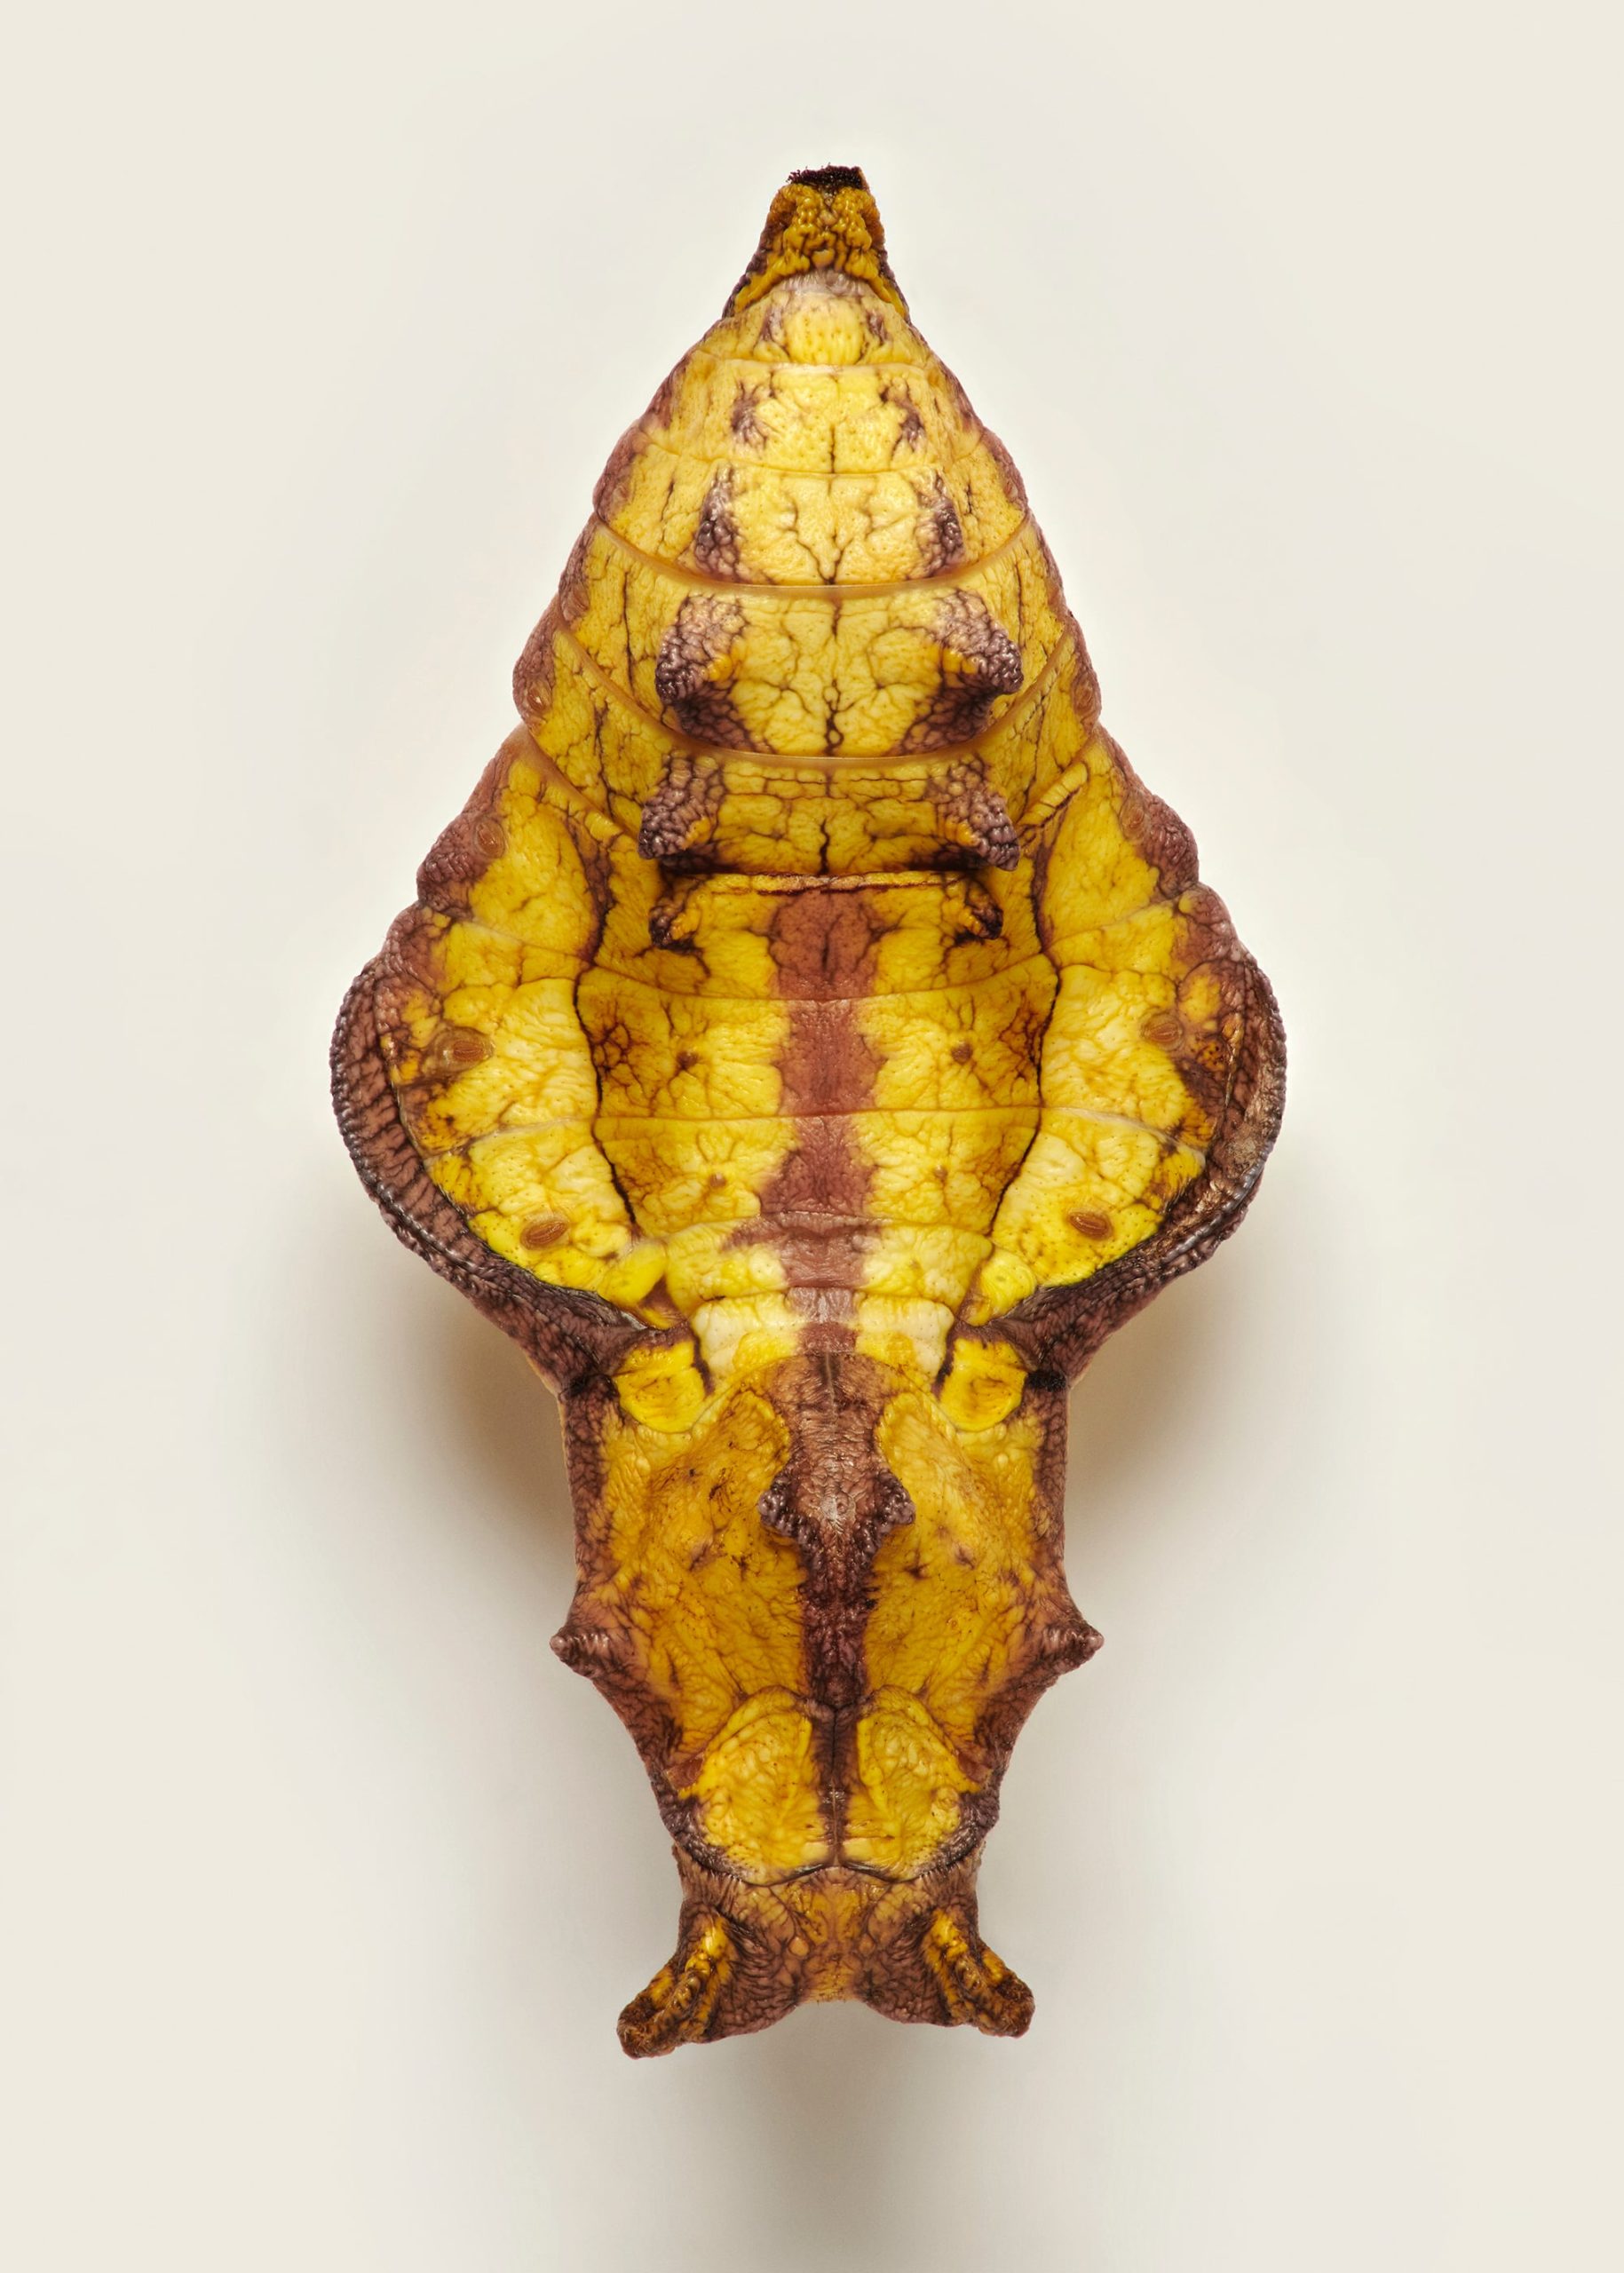 A photo of a butterfly pupa that looks like a plantain